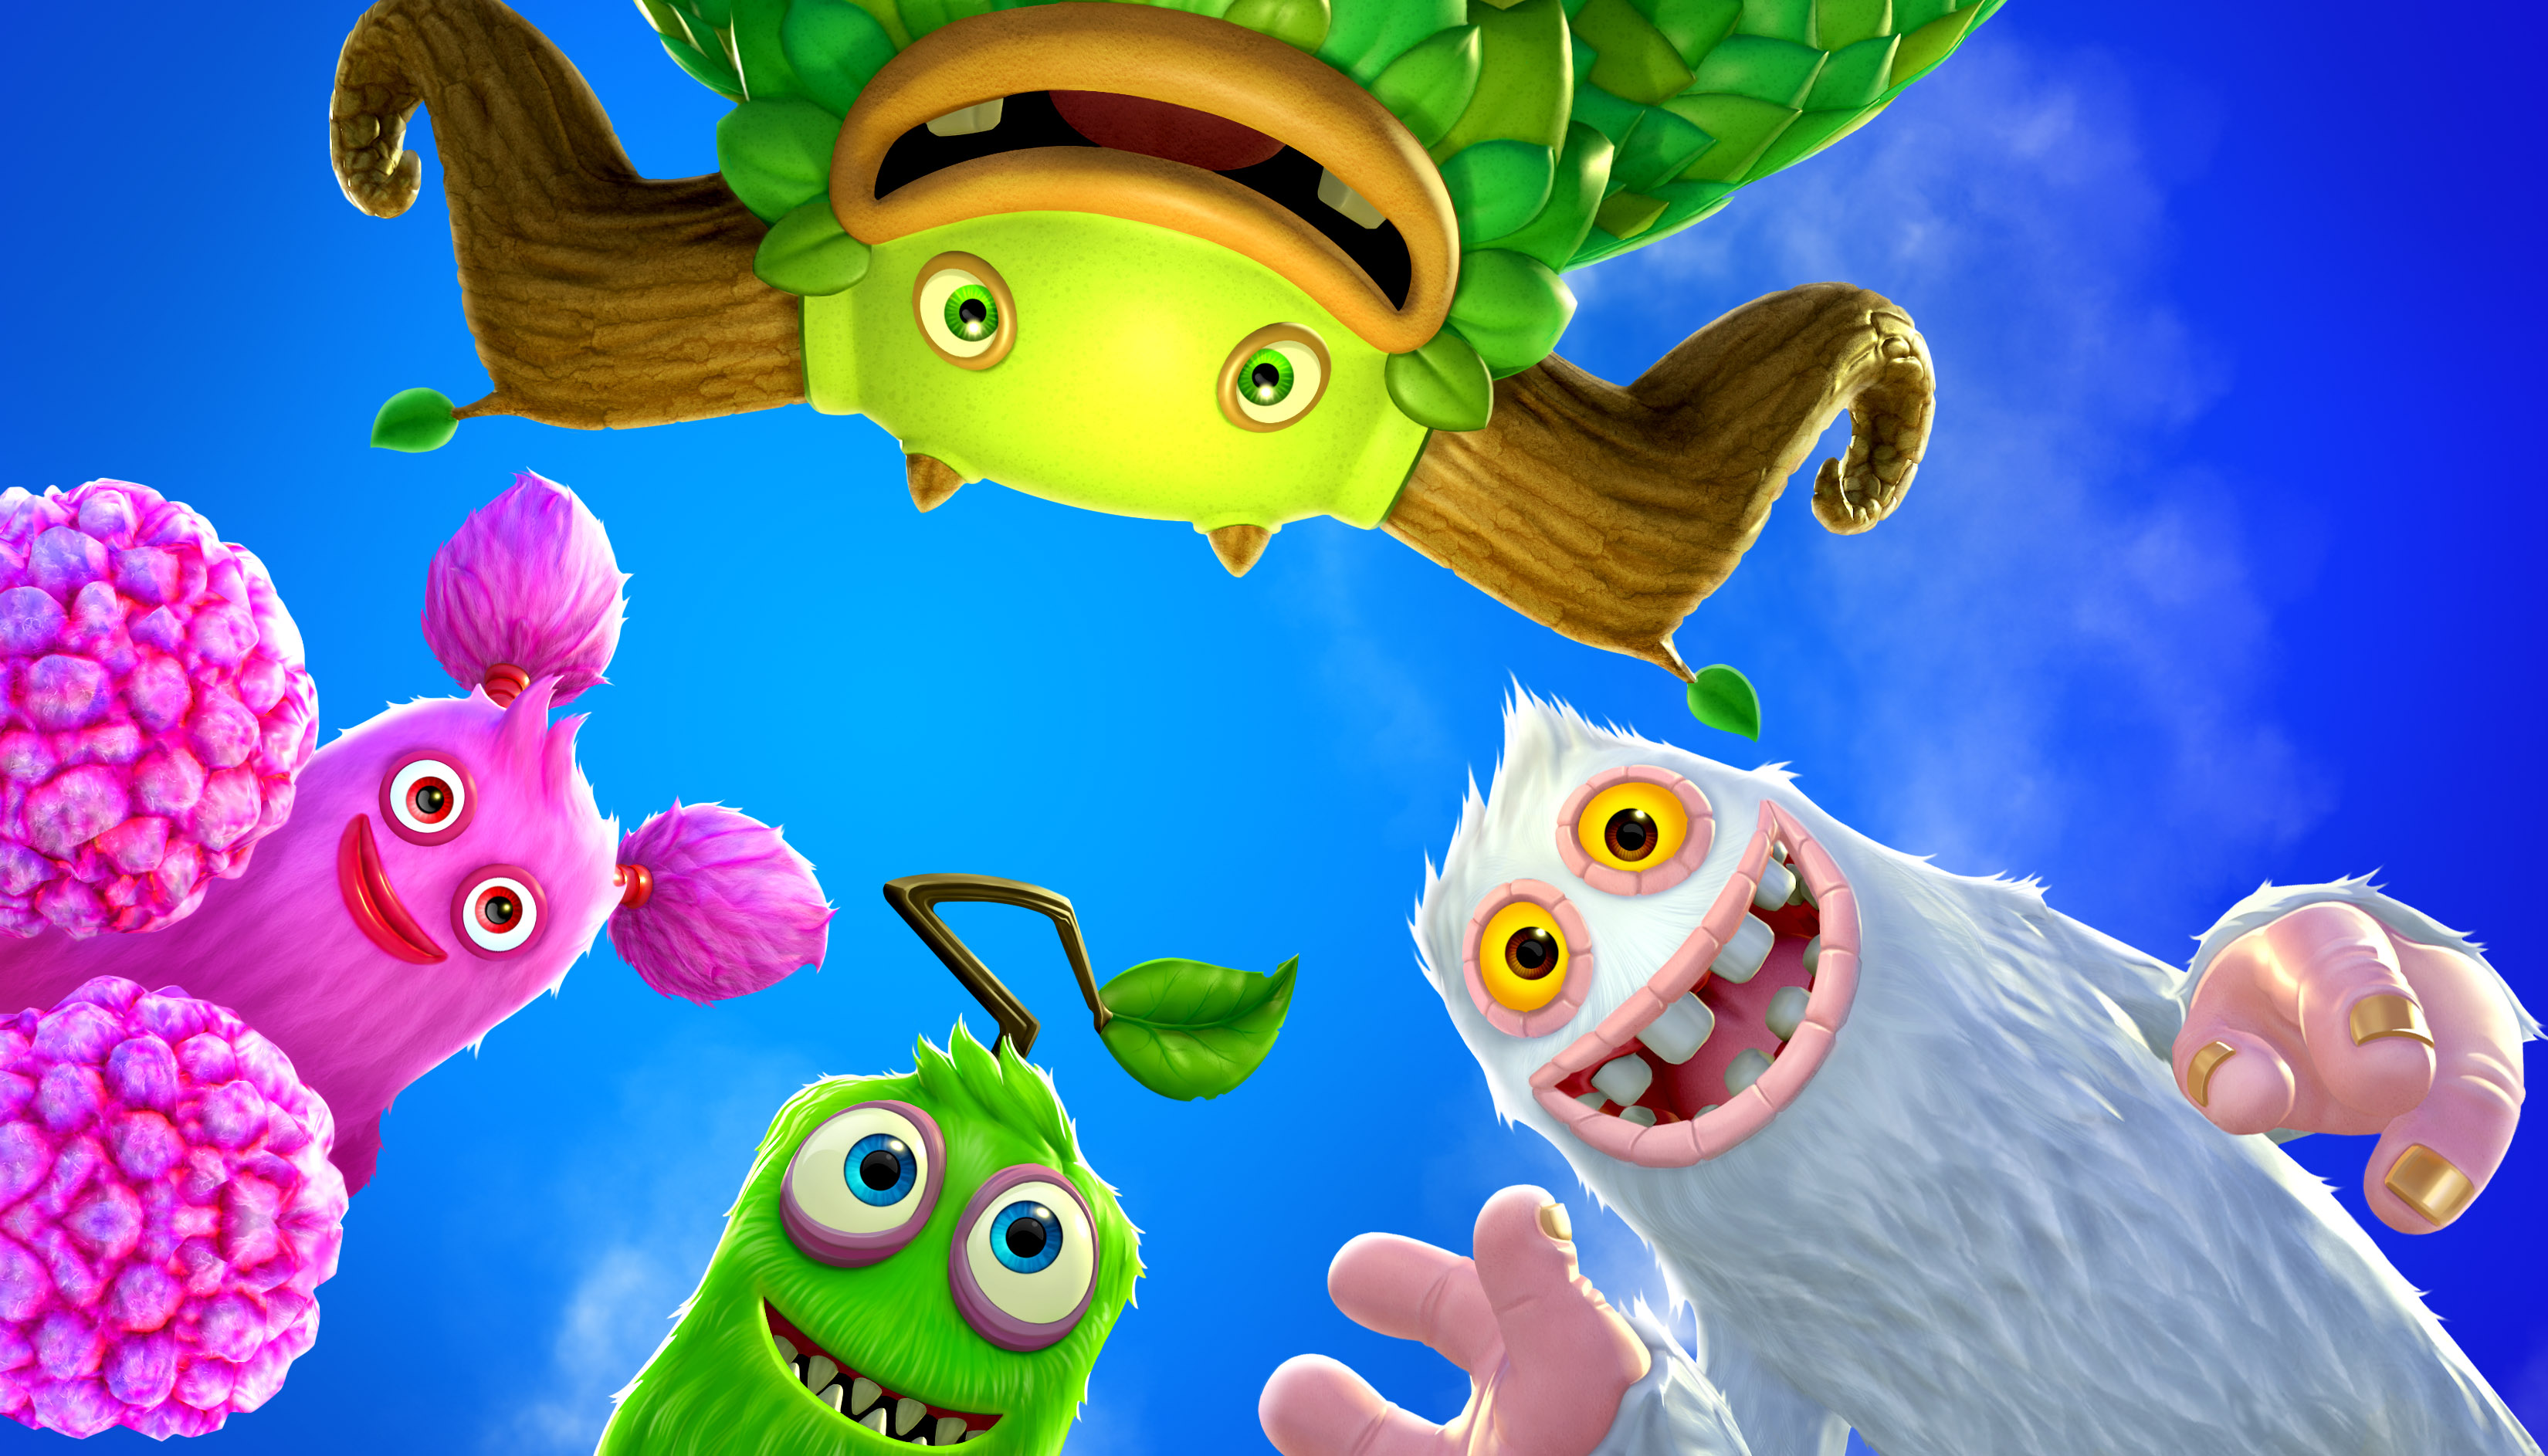 Play Monster Playground Online for Free on PC & Mobile